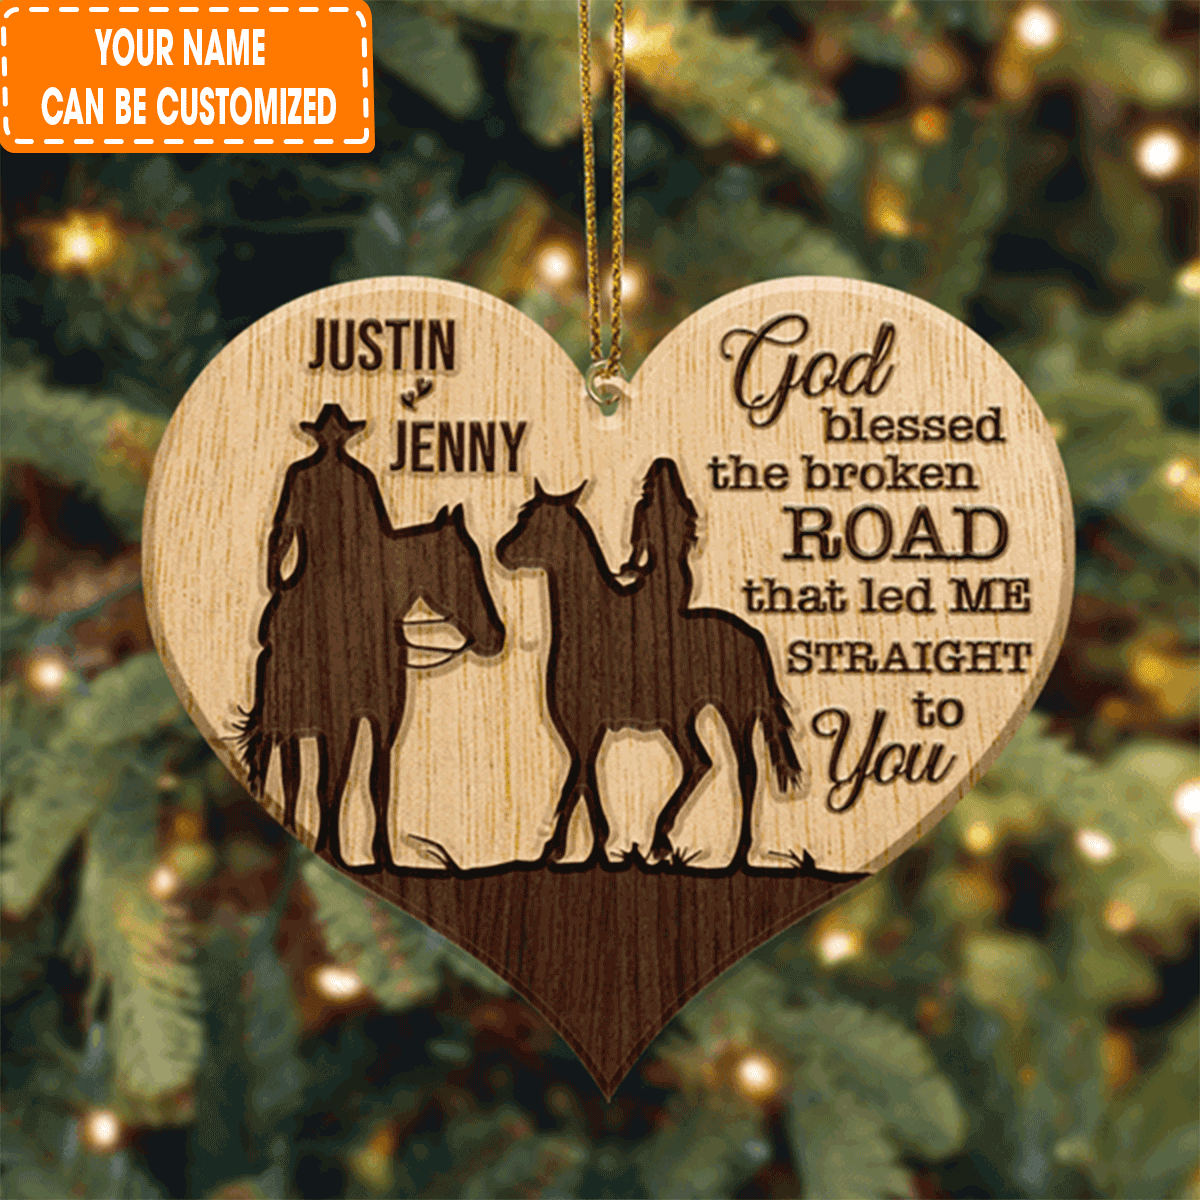 Custom Jesus Acrylic Ornament, Personalized Heart Cowboy And Cowgirl God Blessed Wood Engraved Acrylic Ornament For Christian, Holiday Decor